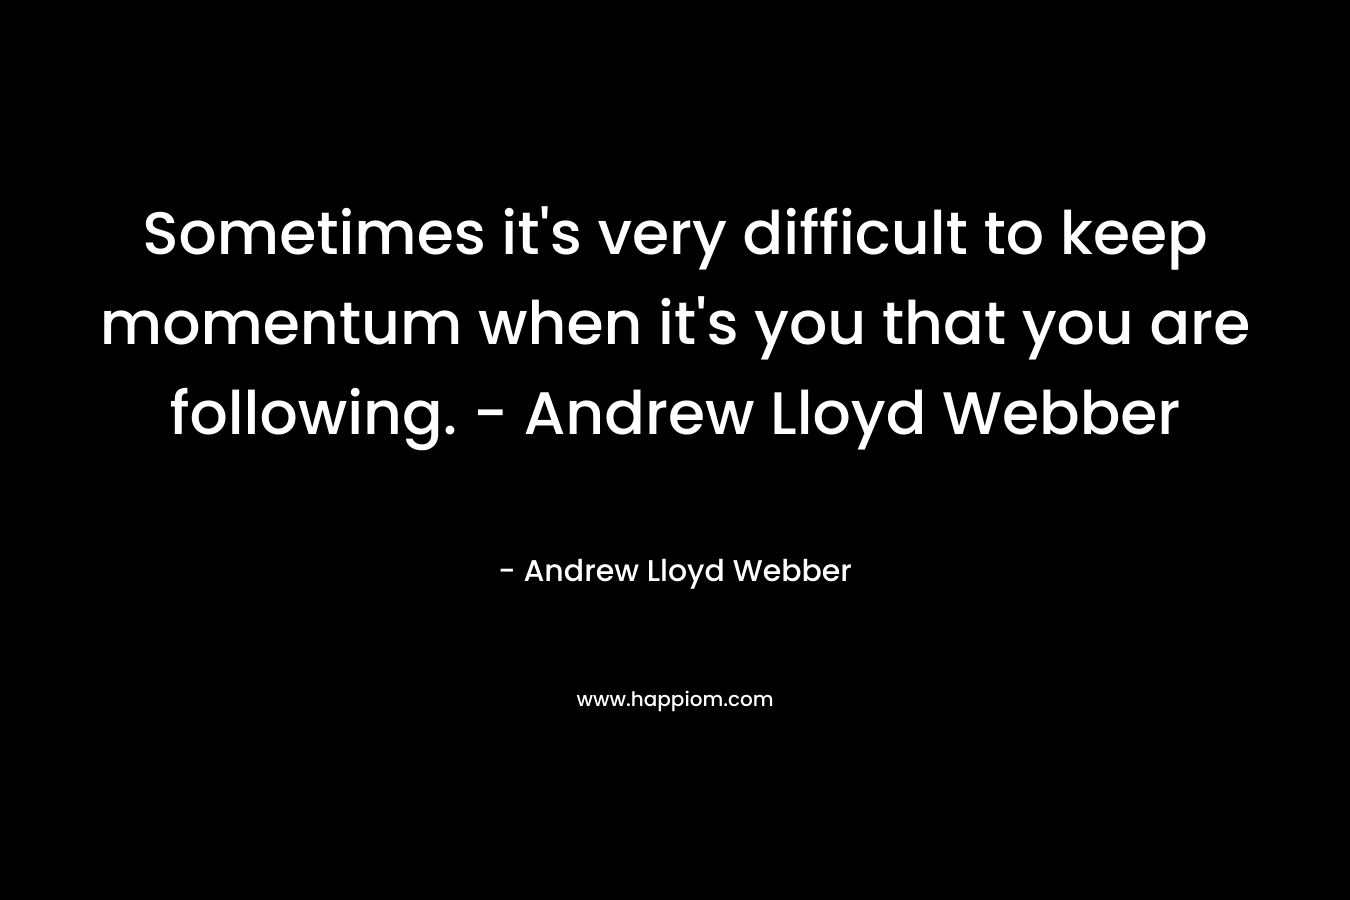 Sometimes it's very difficult to keep momentum when it's you that you are following. - Andrew Lloyd Webber